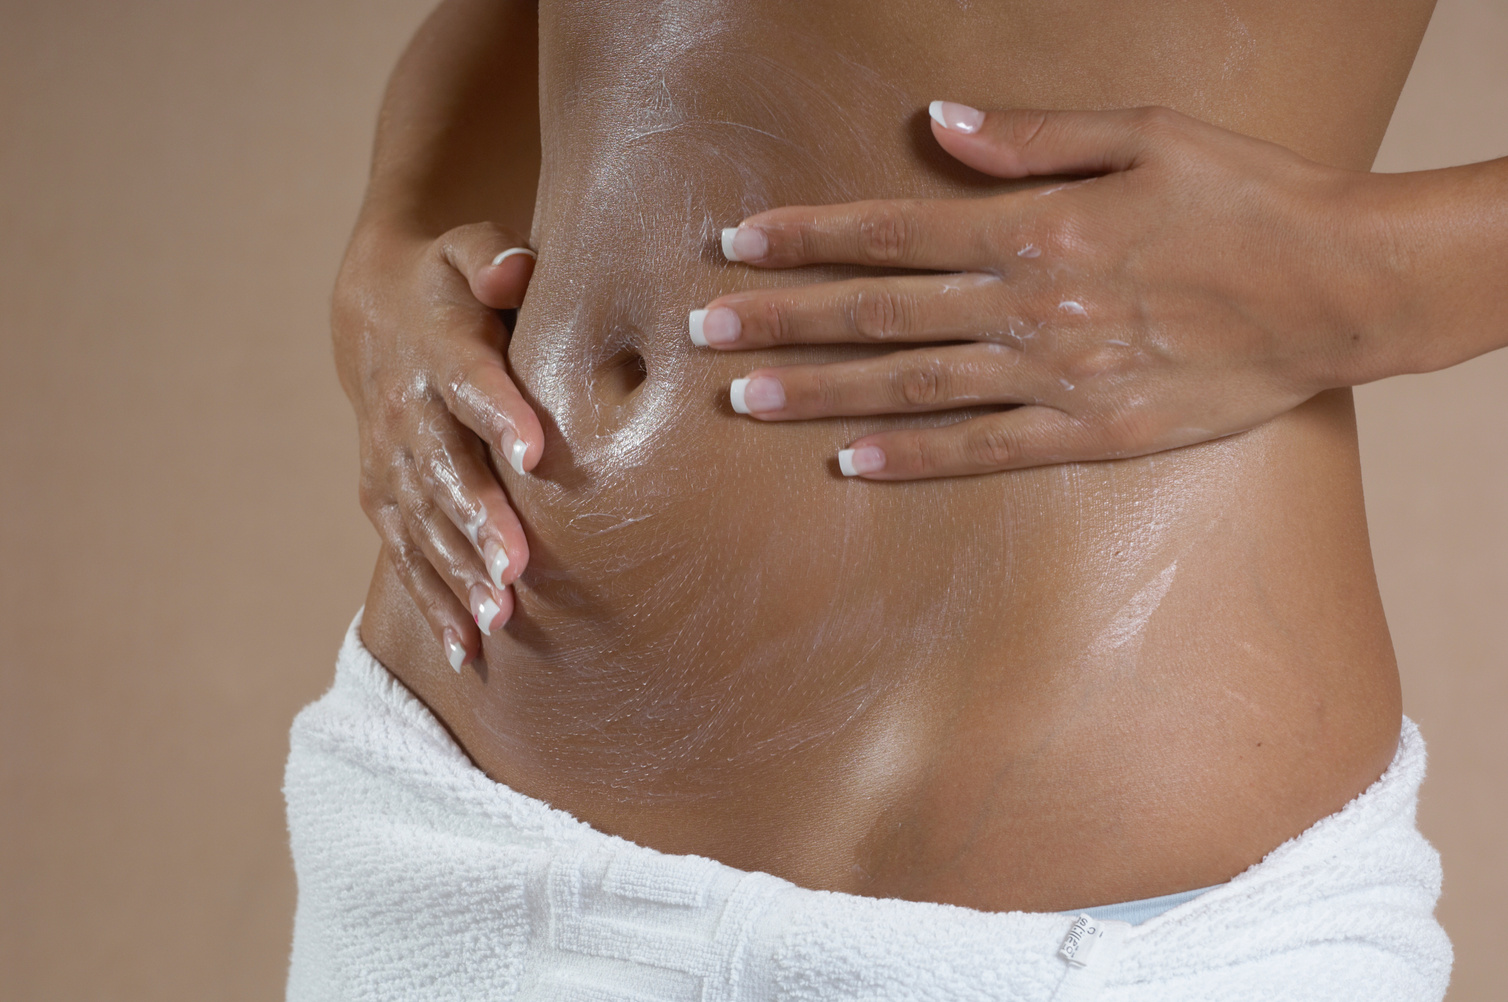 'Woman putting lotion on stomach, mid section'